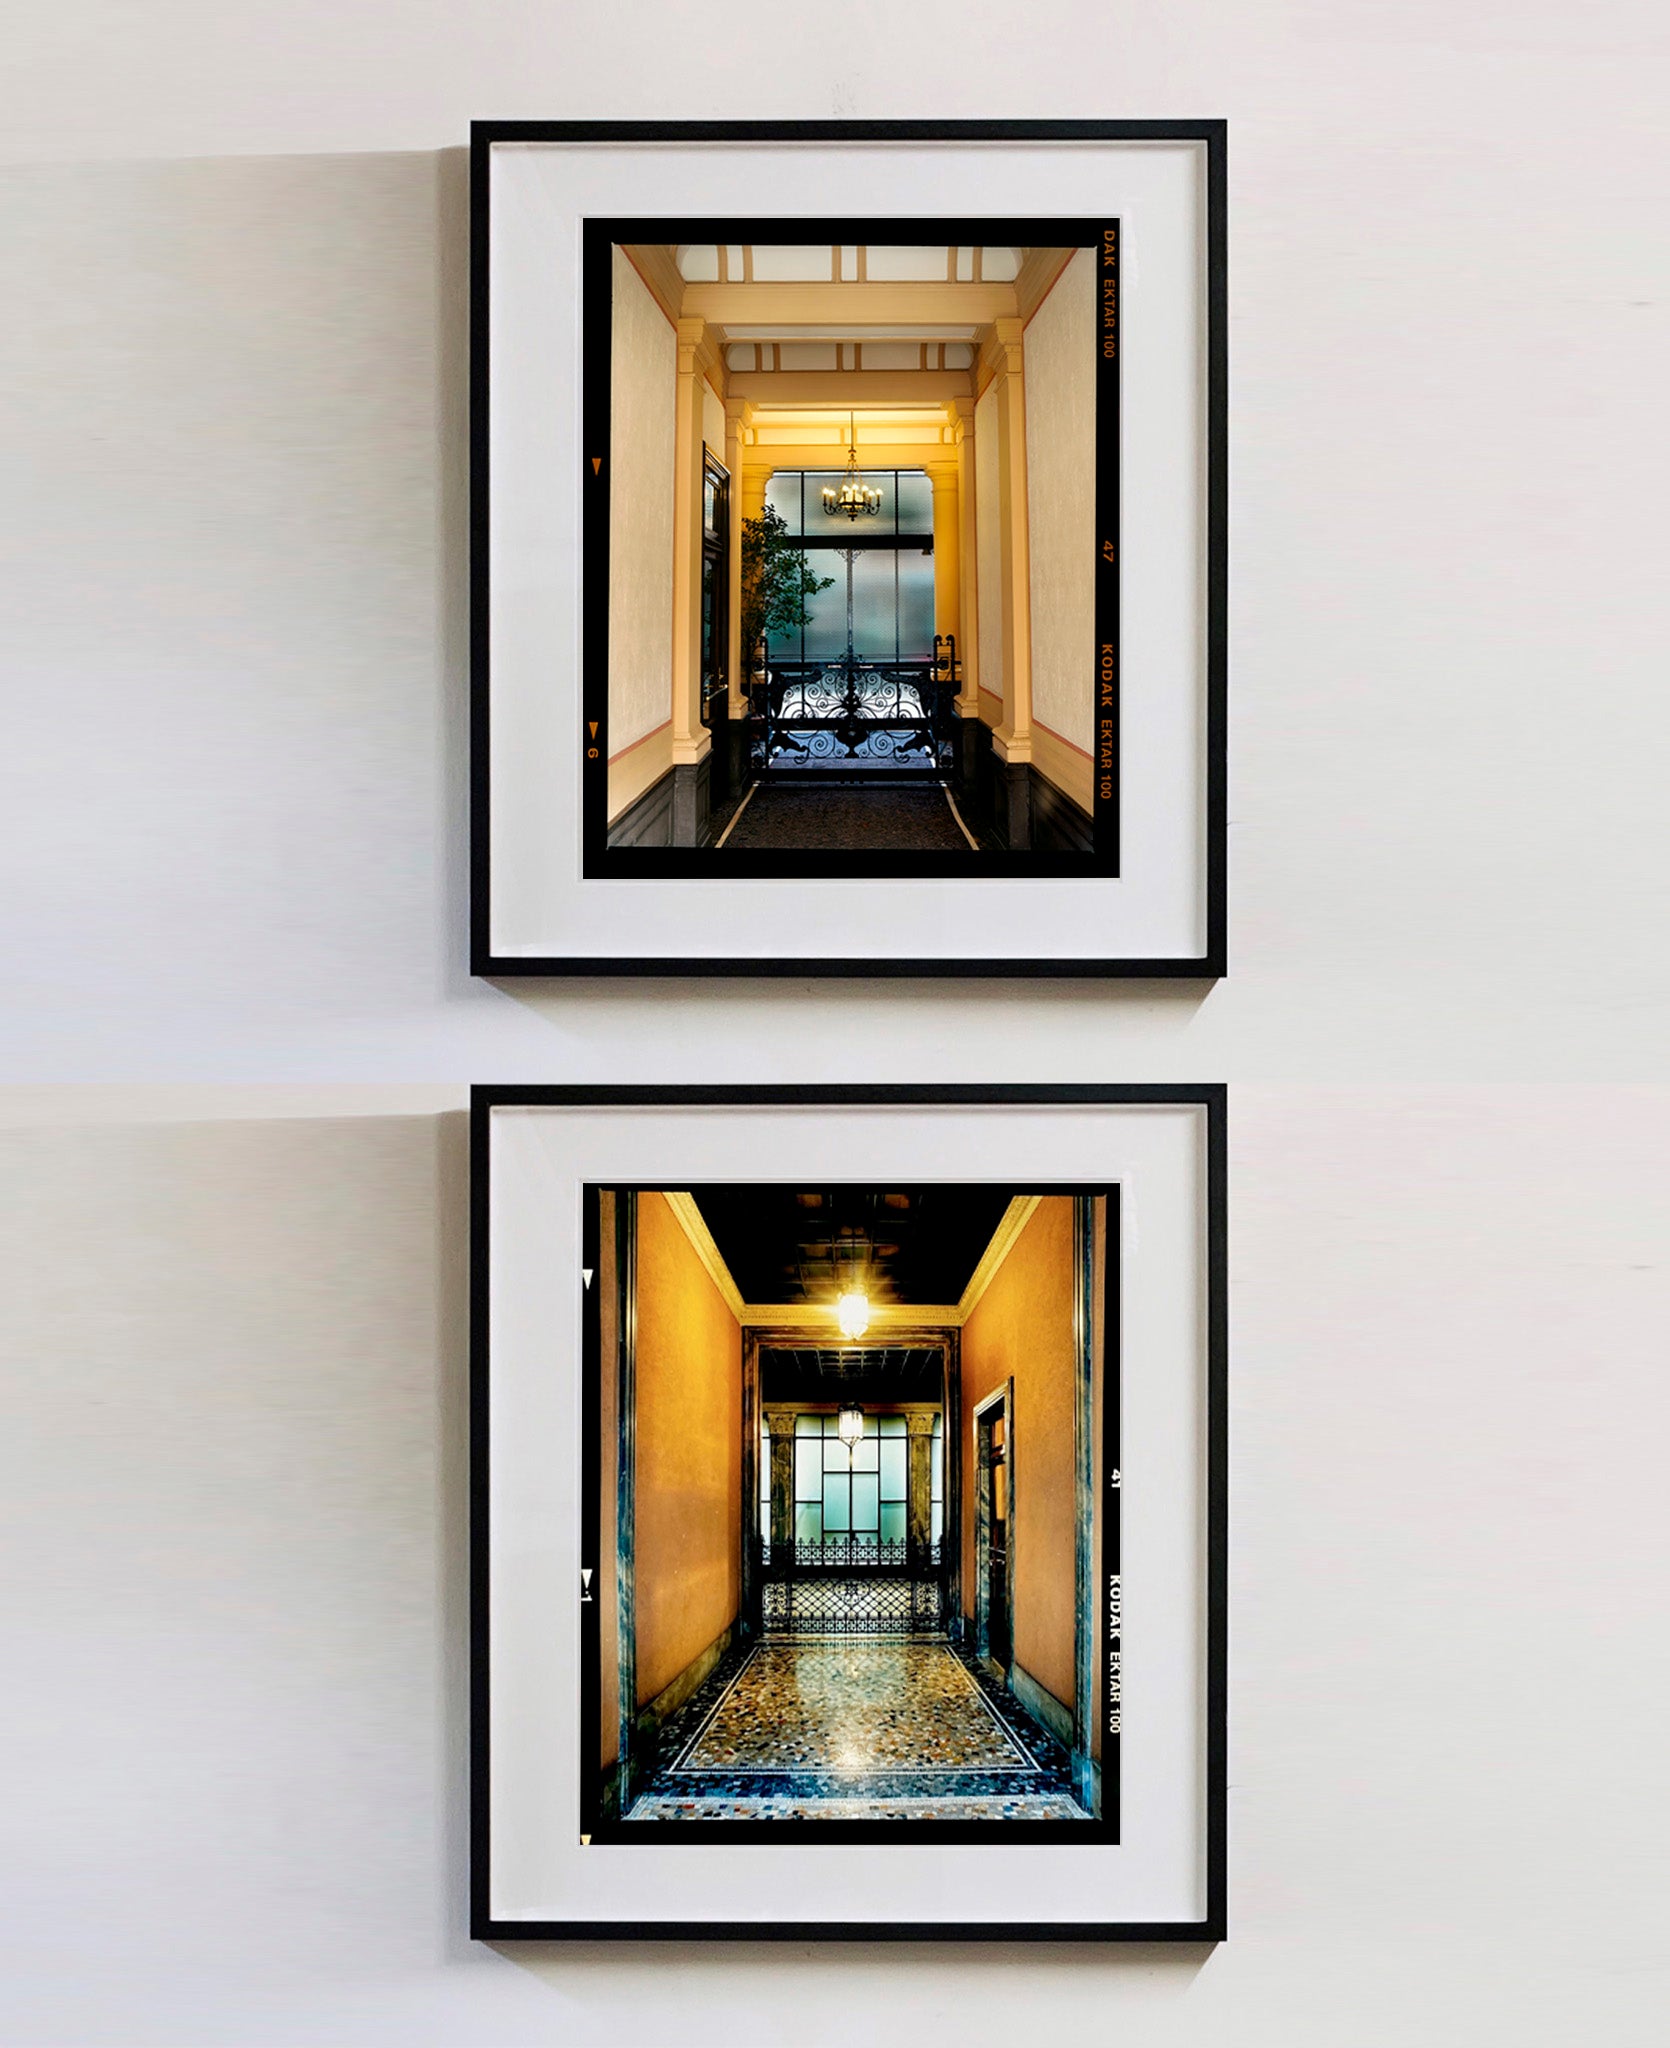 'Foyer I' part of Richard Heeps' series 'A Short History of Milan' which began in November 2018 for a special project featuring at the Affordable Art Fair Milan 2019, and the series is ongoing. There is a reoccurring linear, structural theme throughout the series, capturing the Milanese use of materials in design such as glass, metal, wood and stone. 